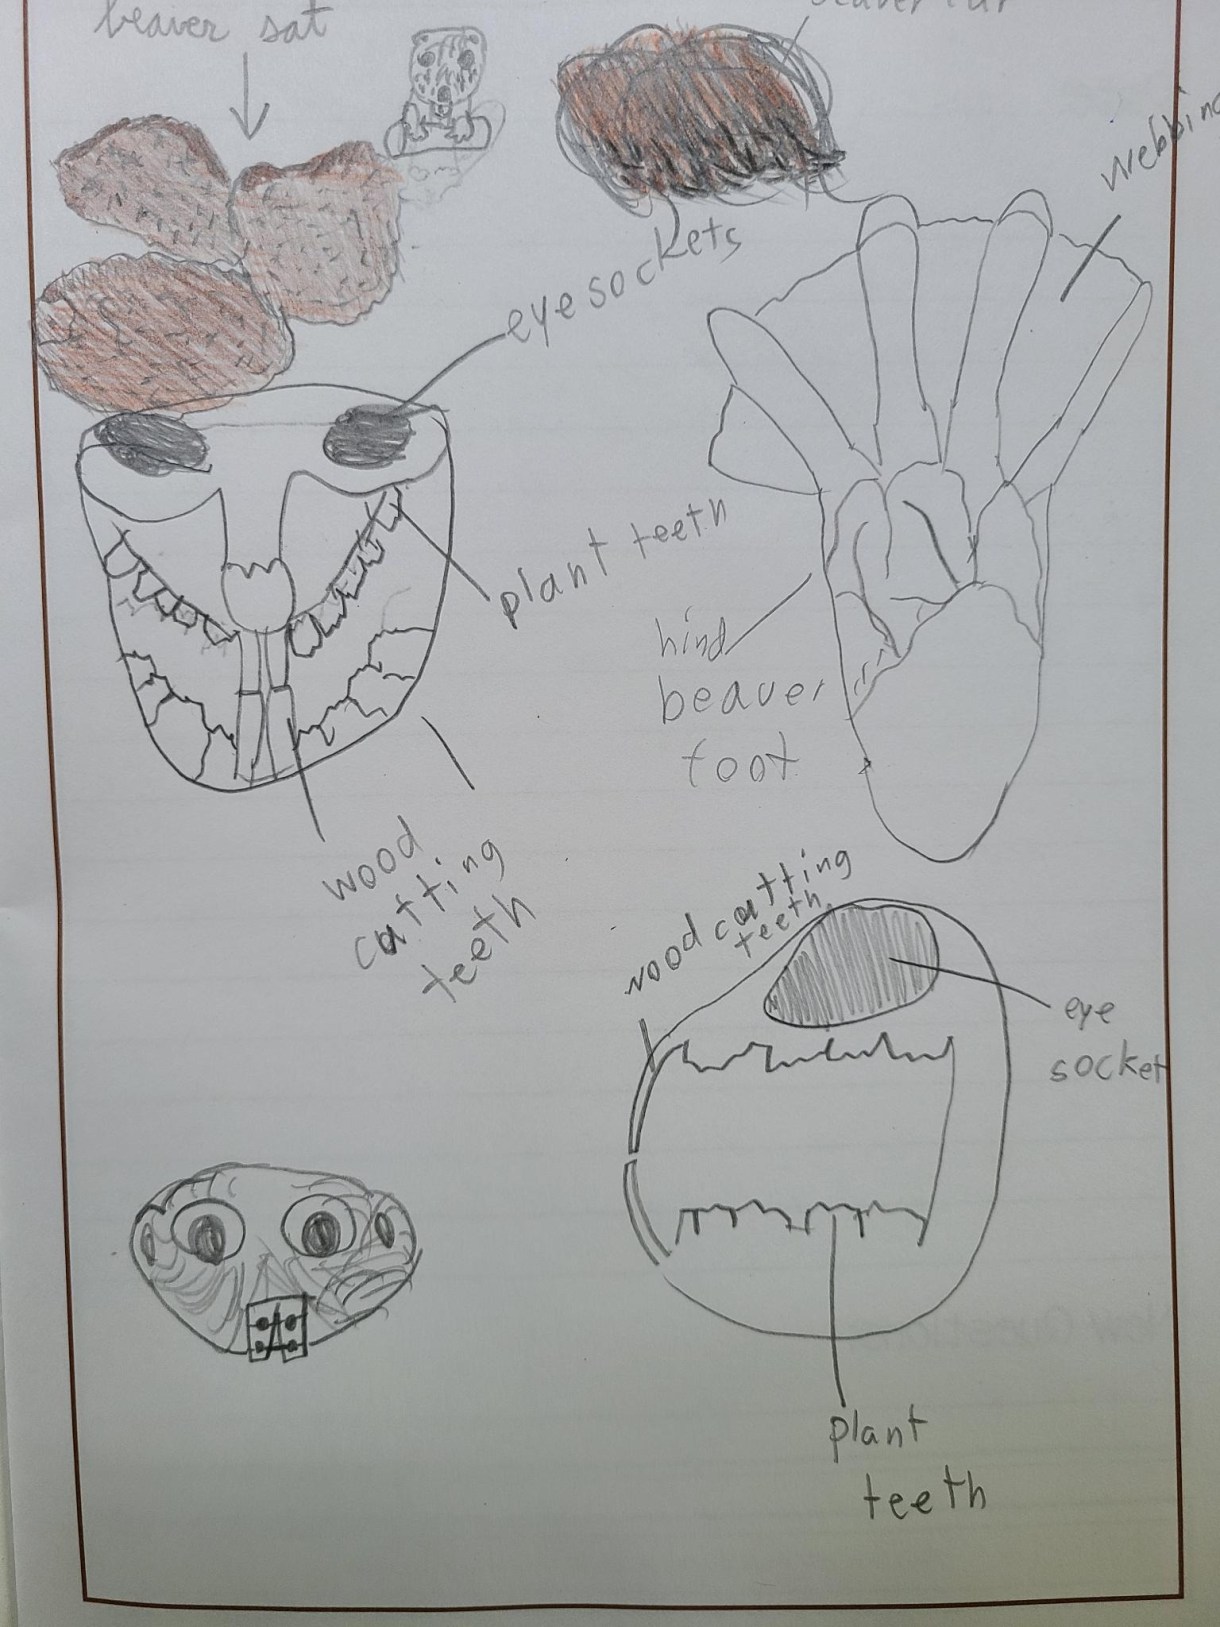 a child's drawing of a beaver skull seen from different angles, with front teeth labeled as "wood cutting teeth" back teeth labeled as "plant teeth" the eye sockets labeled, too. The skulls are childishly drawn. there is also a colored in illustration of beaver scat as well as a pencil drawing of a hind beaver foot with the webbing pointed out. finally, there is a child's joke, a beavery drawn with braces